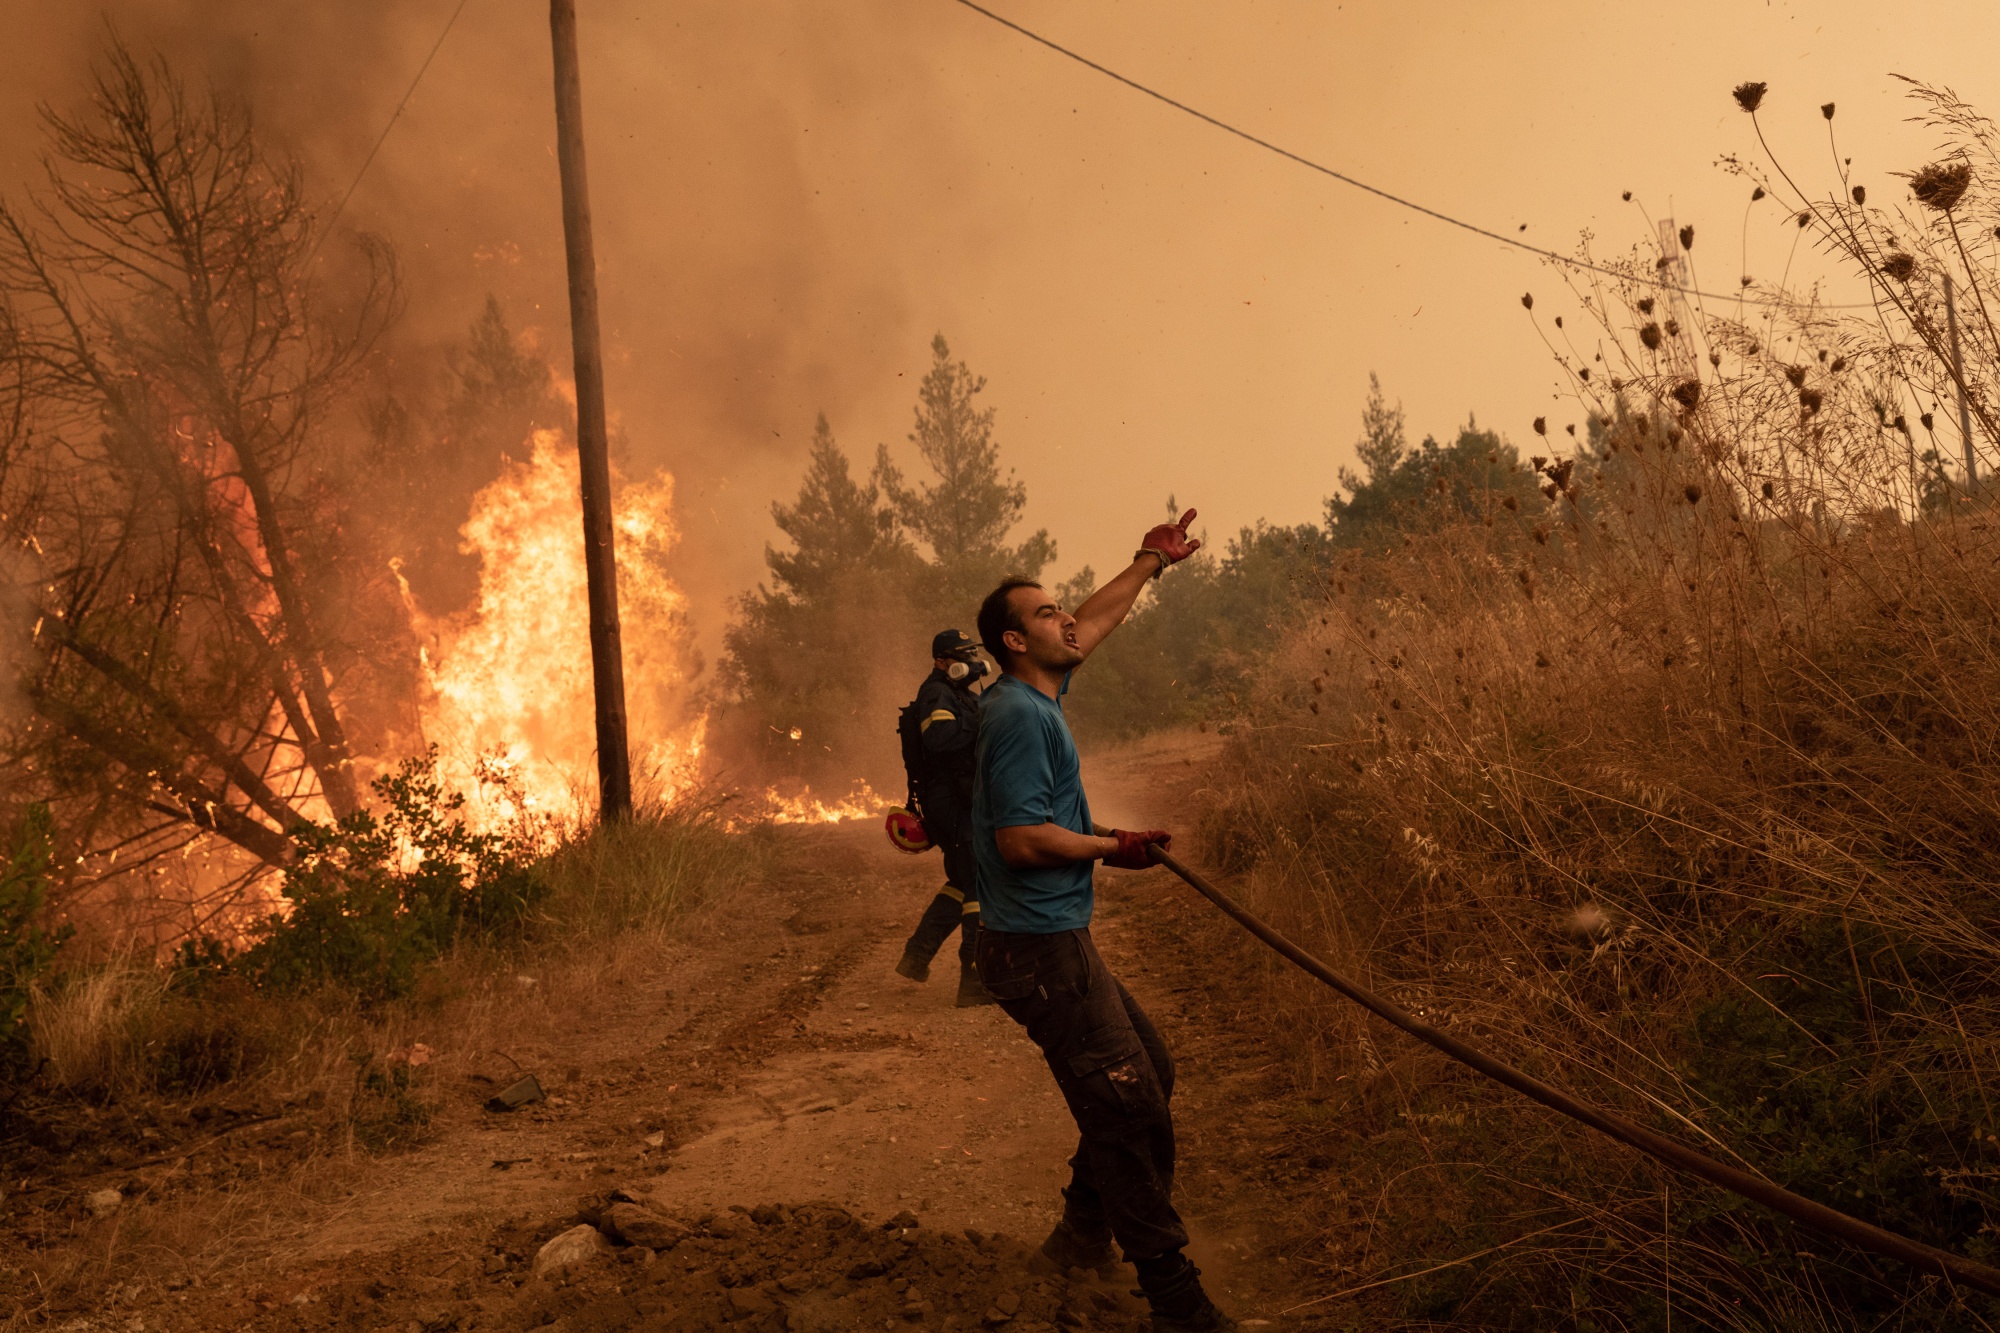 A firefighter douses flames from a wildfire on the island of Evia, Greece, in August.